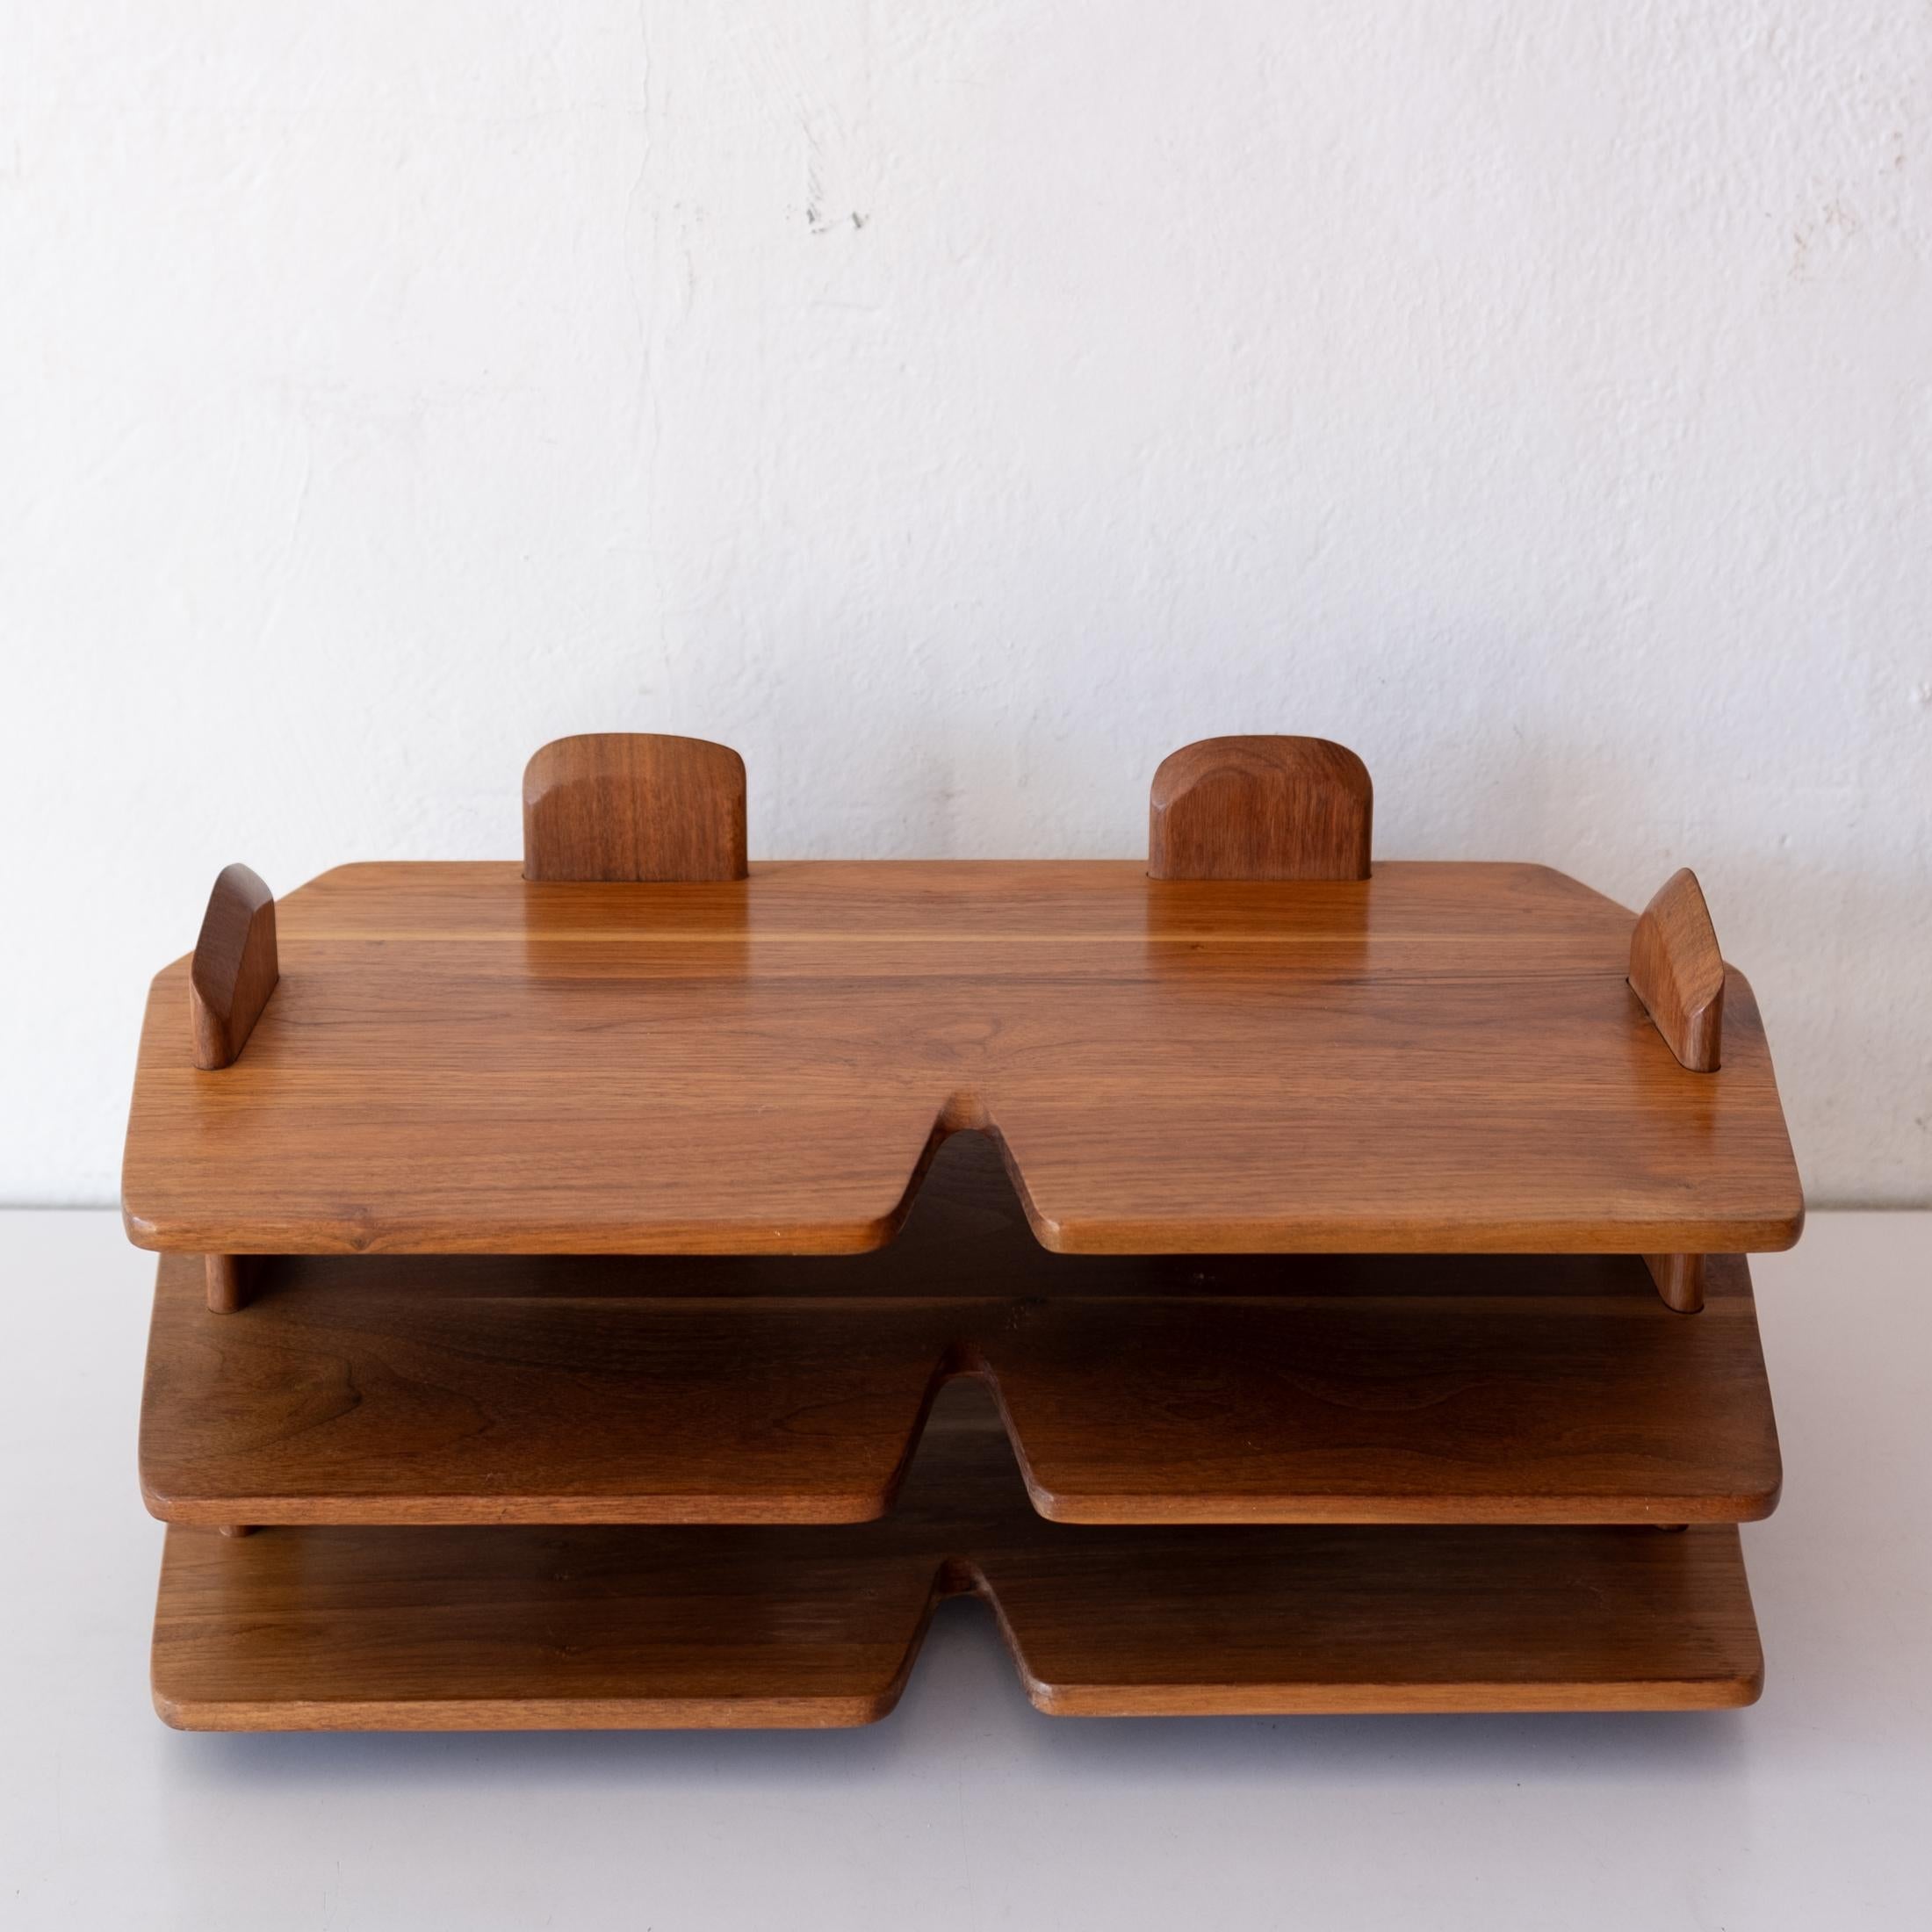 Late 20th Century Handcrafted Studio Wood Letter Trays by Appalachian Artist Kelly Mehler For Sale